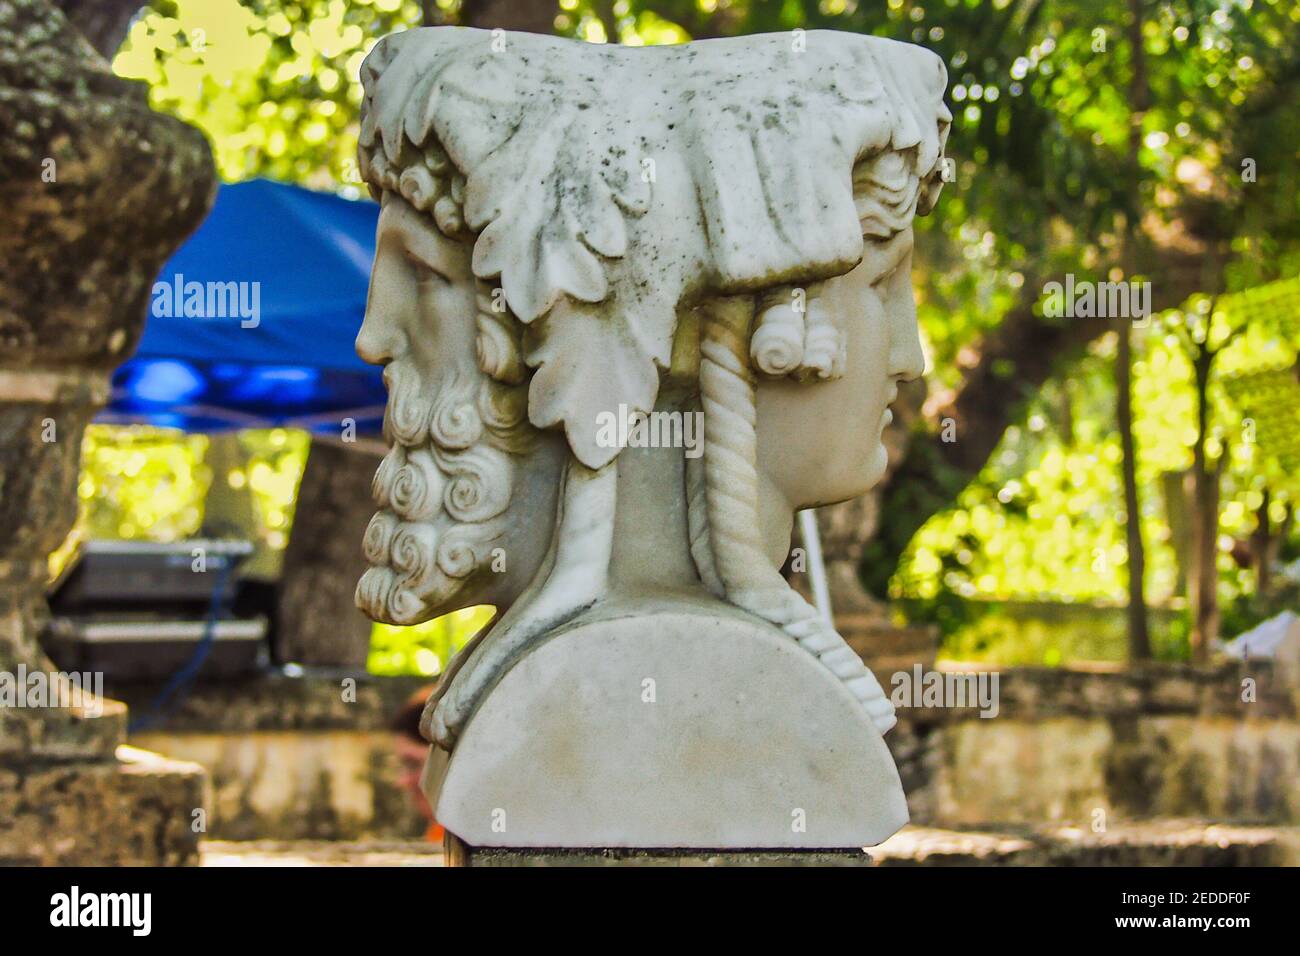 Marble bust of the two faced Roman god, Janus, on the Garden Mound at Villa Vizcaya in Miami, Florida. Stock Photo